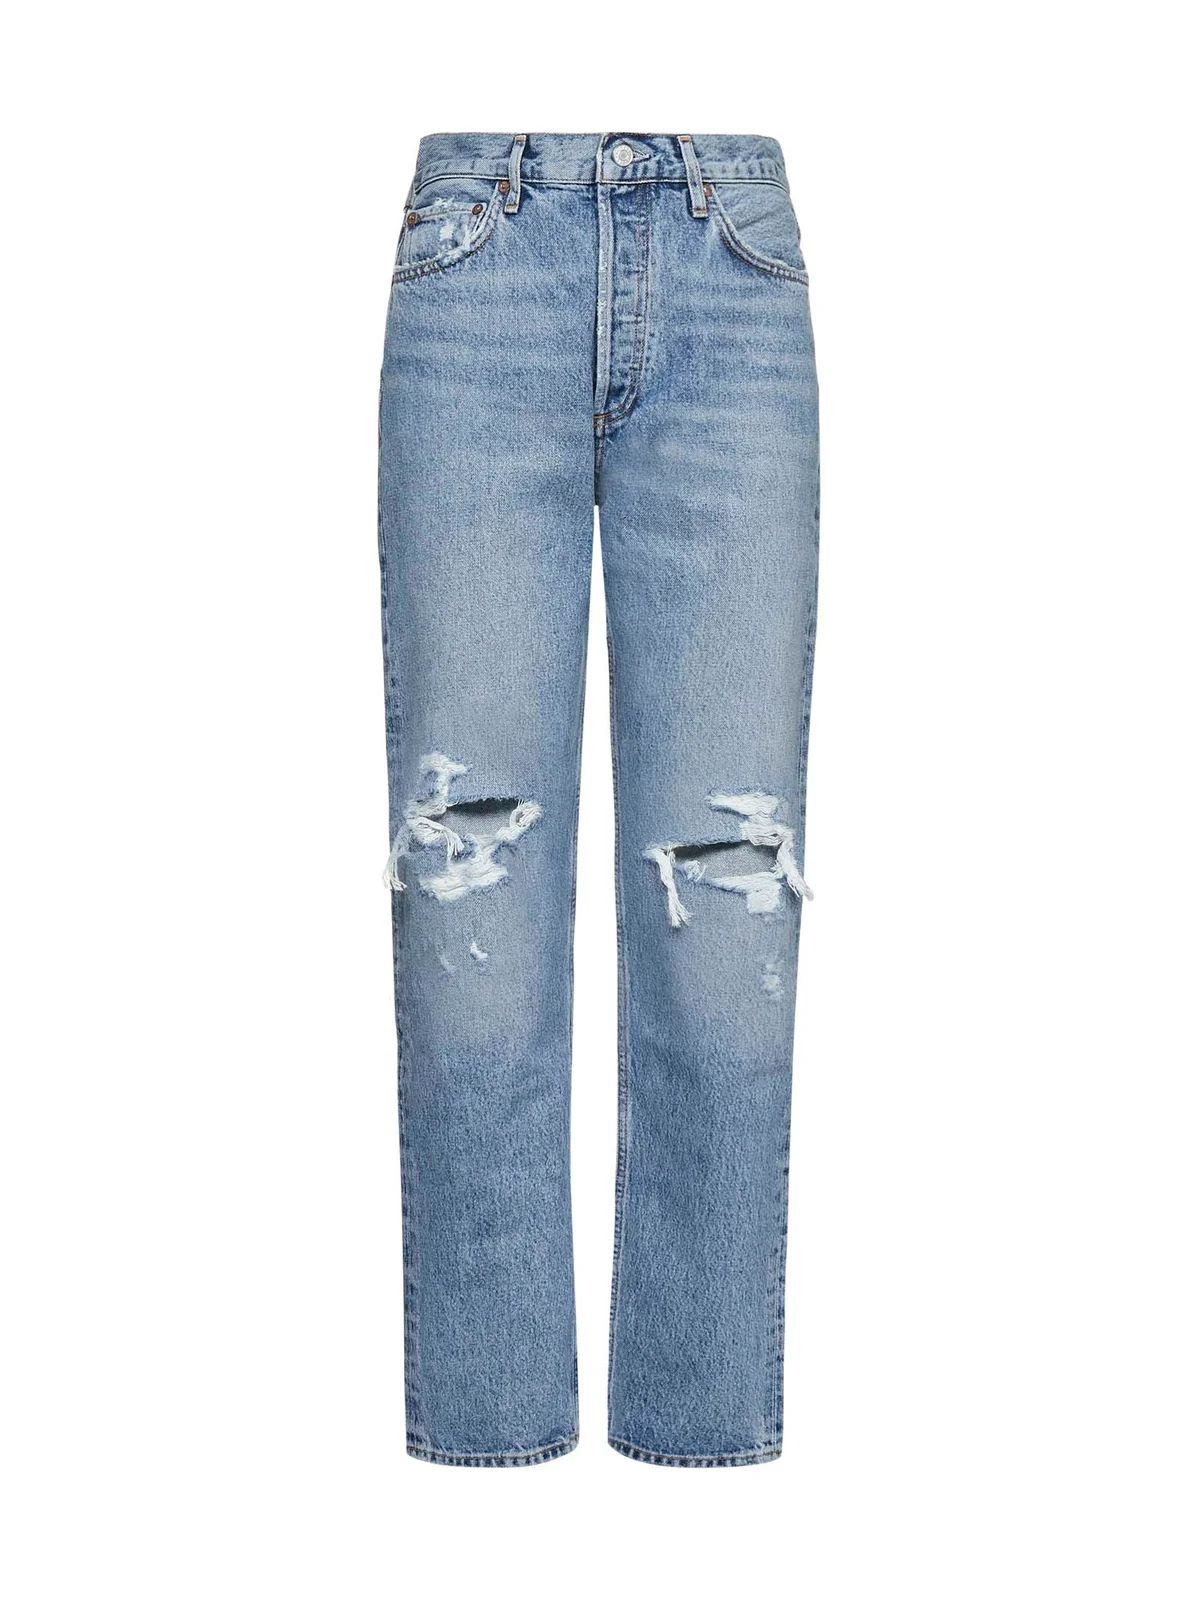 AGOLDE 90s Distressed Straight-Leg Jeans | Cettire Global